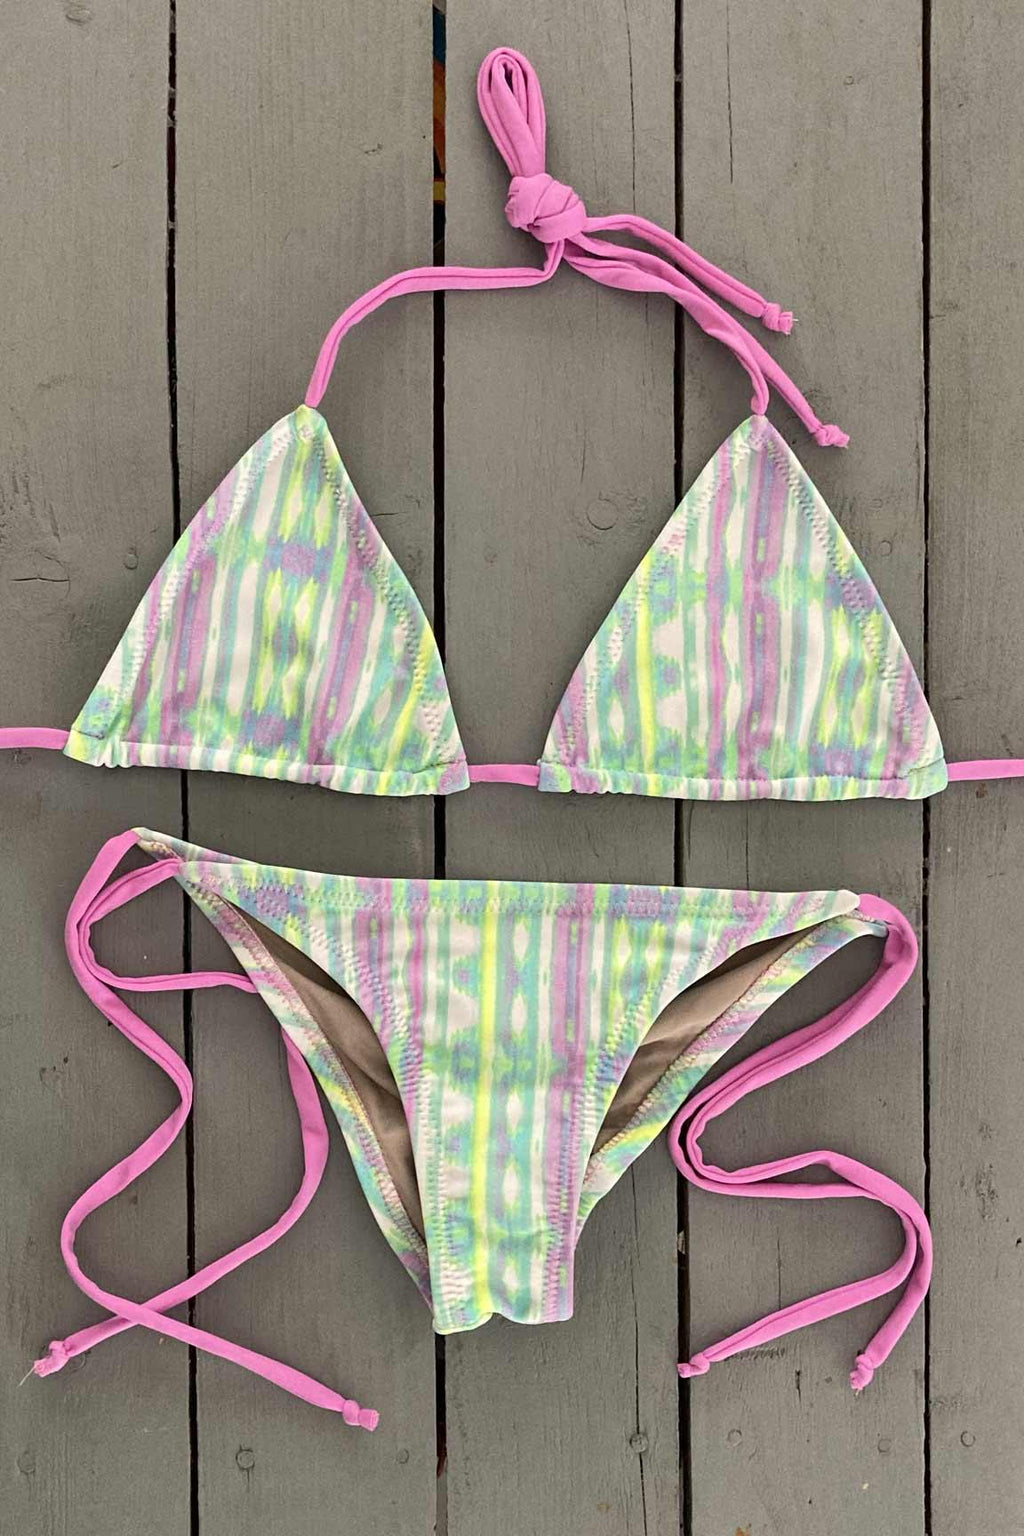 Splash around by the pool this summer in this super cute adjustable triangle bikini top. Made with the finest quality of soft and stretchy Lycra to achieve the best fit. Order yours today. @jillesbikinis  